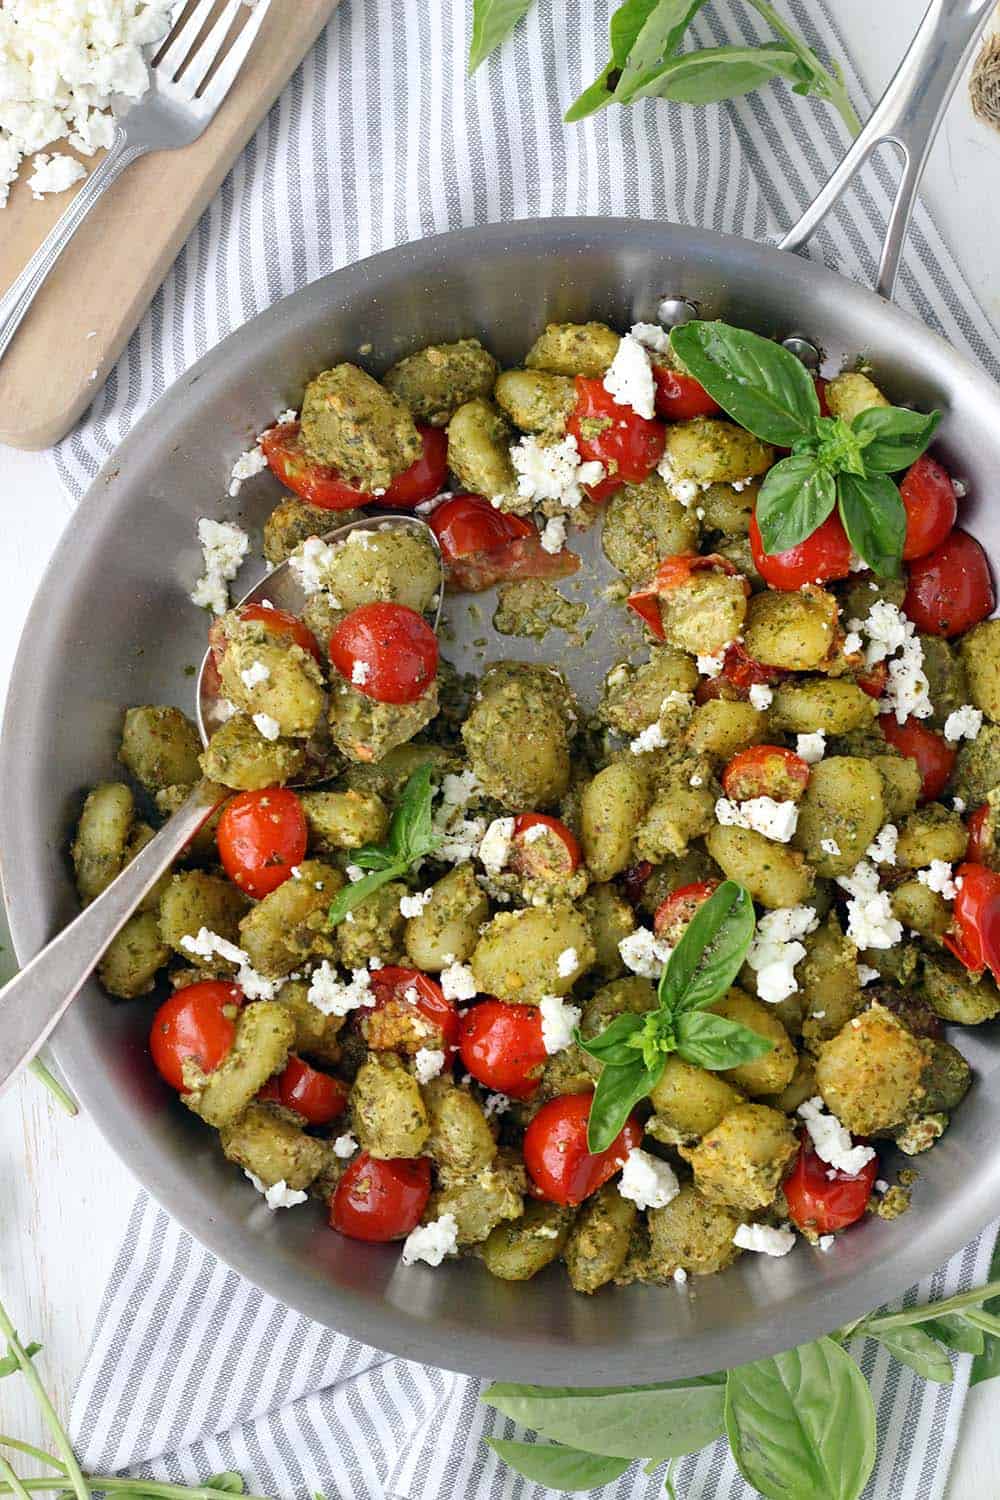 Closeup of pesto coated gnocchi in a steel pan with cherry tomatoes and goat cheese.